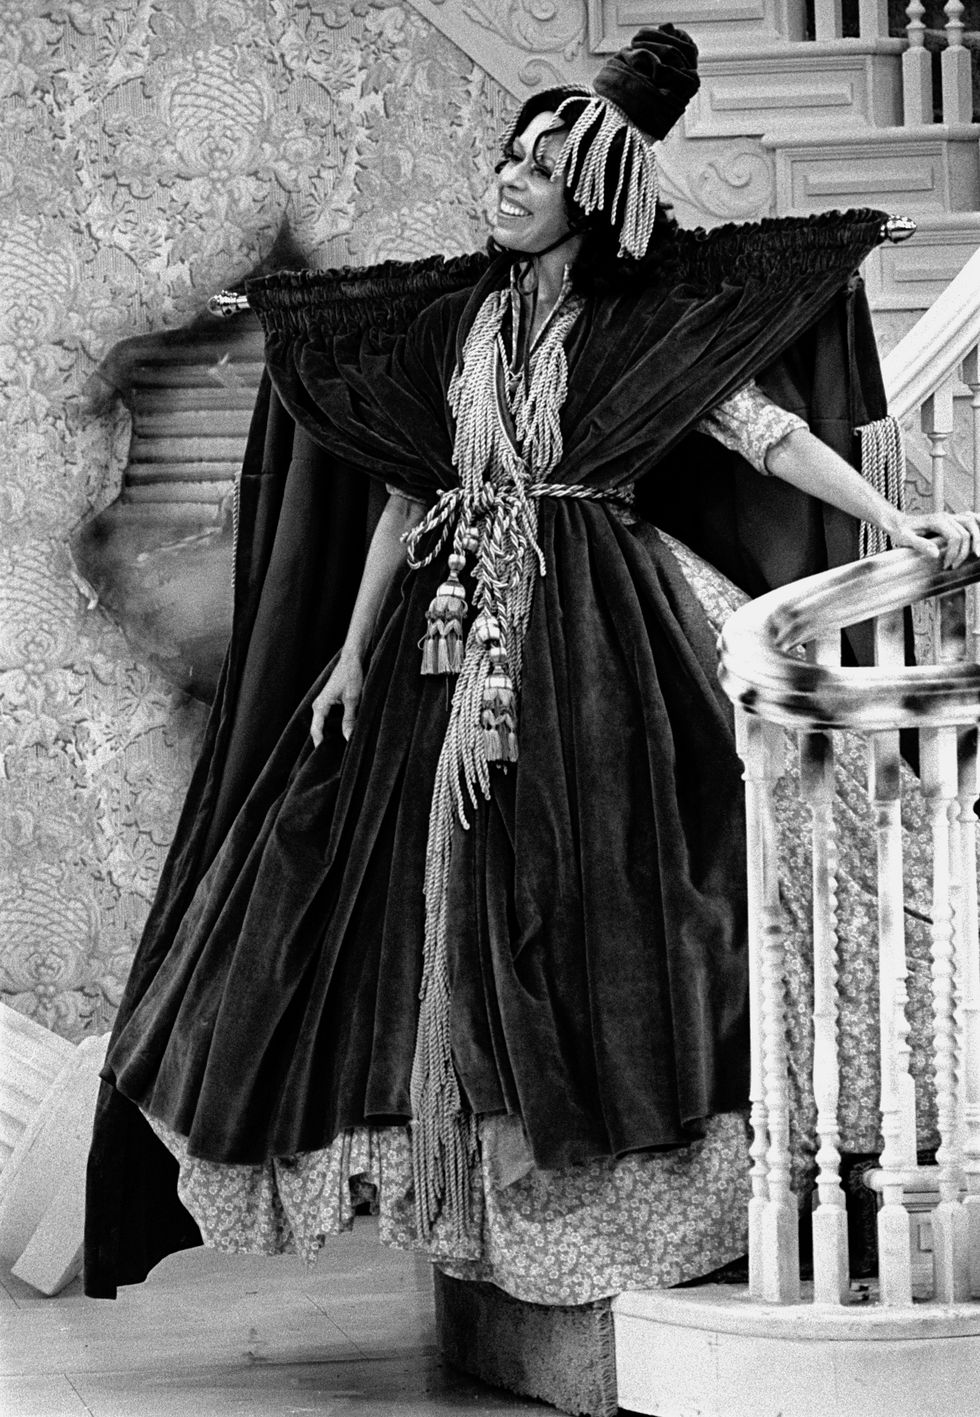 in a scene from the carol burnett show, american comedienne and actress carol burnett descends a staircase, dressed in dress made from a window curtain compete with the curtain rod during a parody of gone with the wind, august 20, 1976 photo by cbs photo archivegetty images